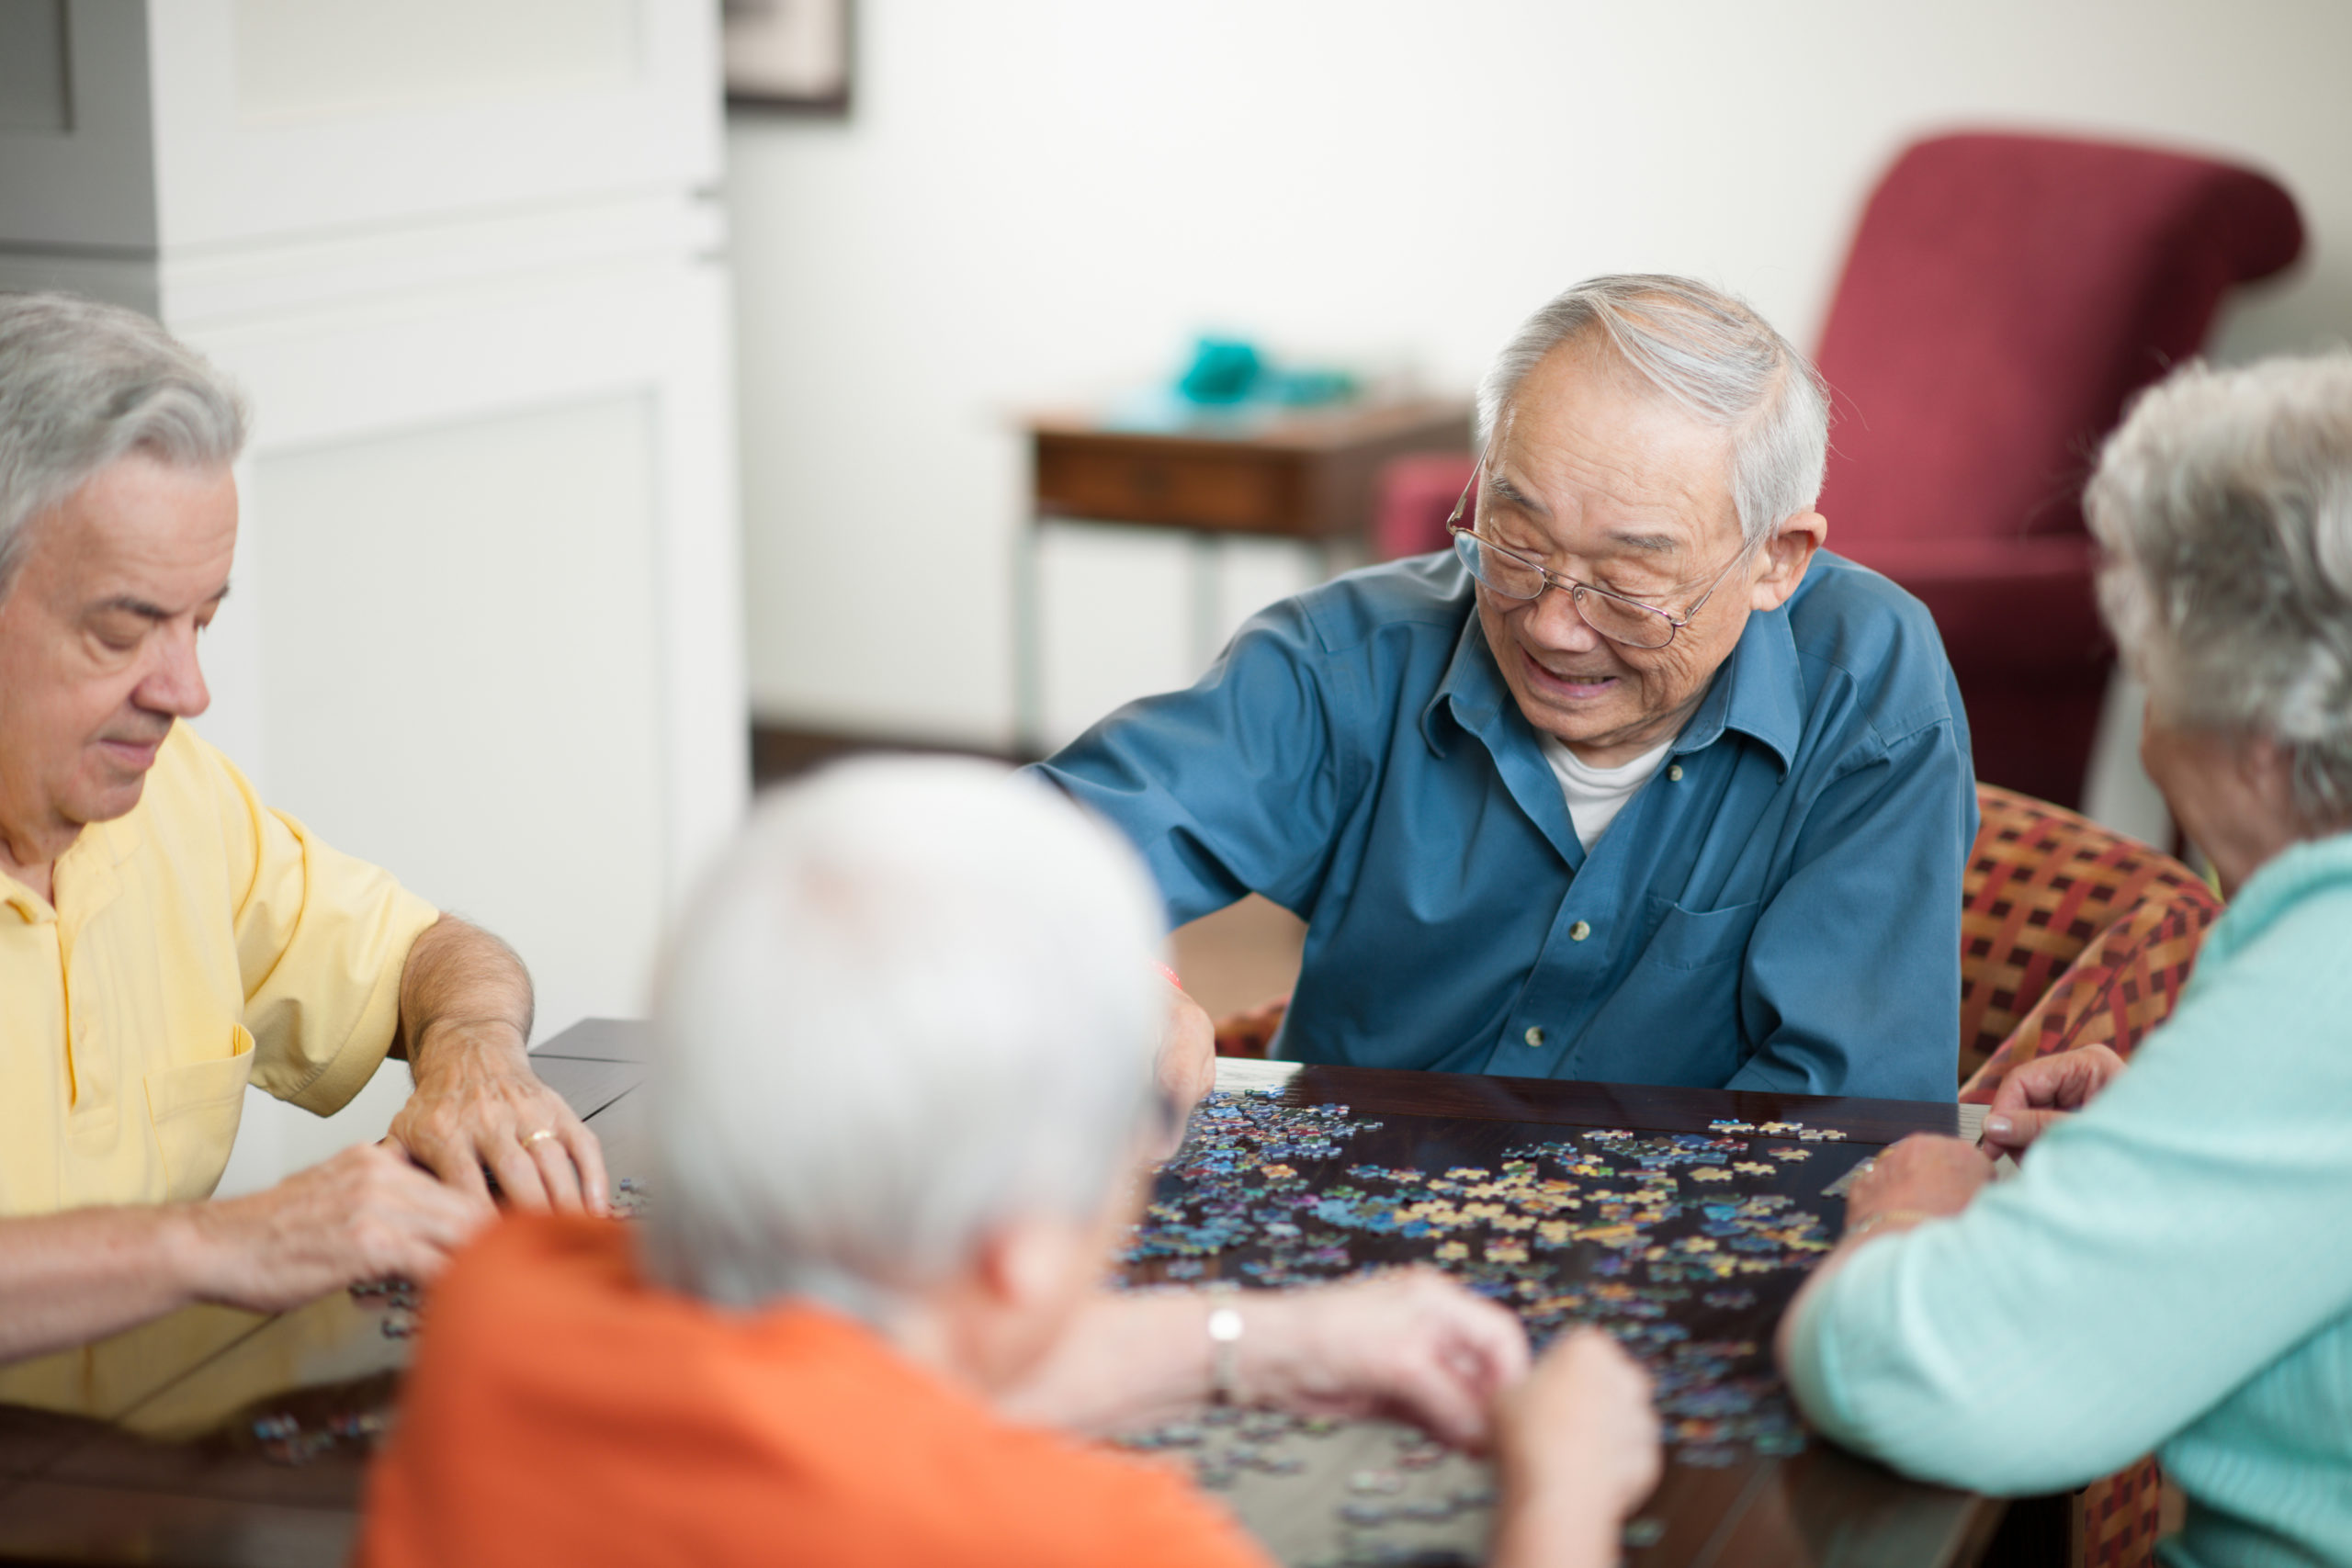 At St. Patrick's Home we make it our top priority to keep our residents socially active